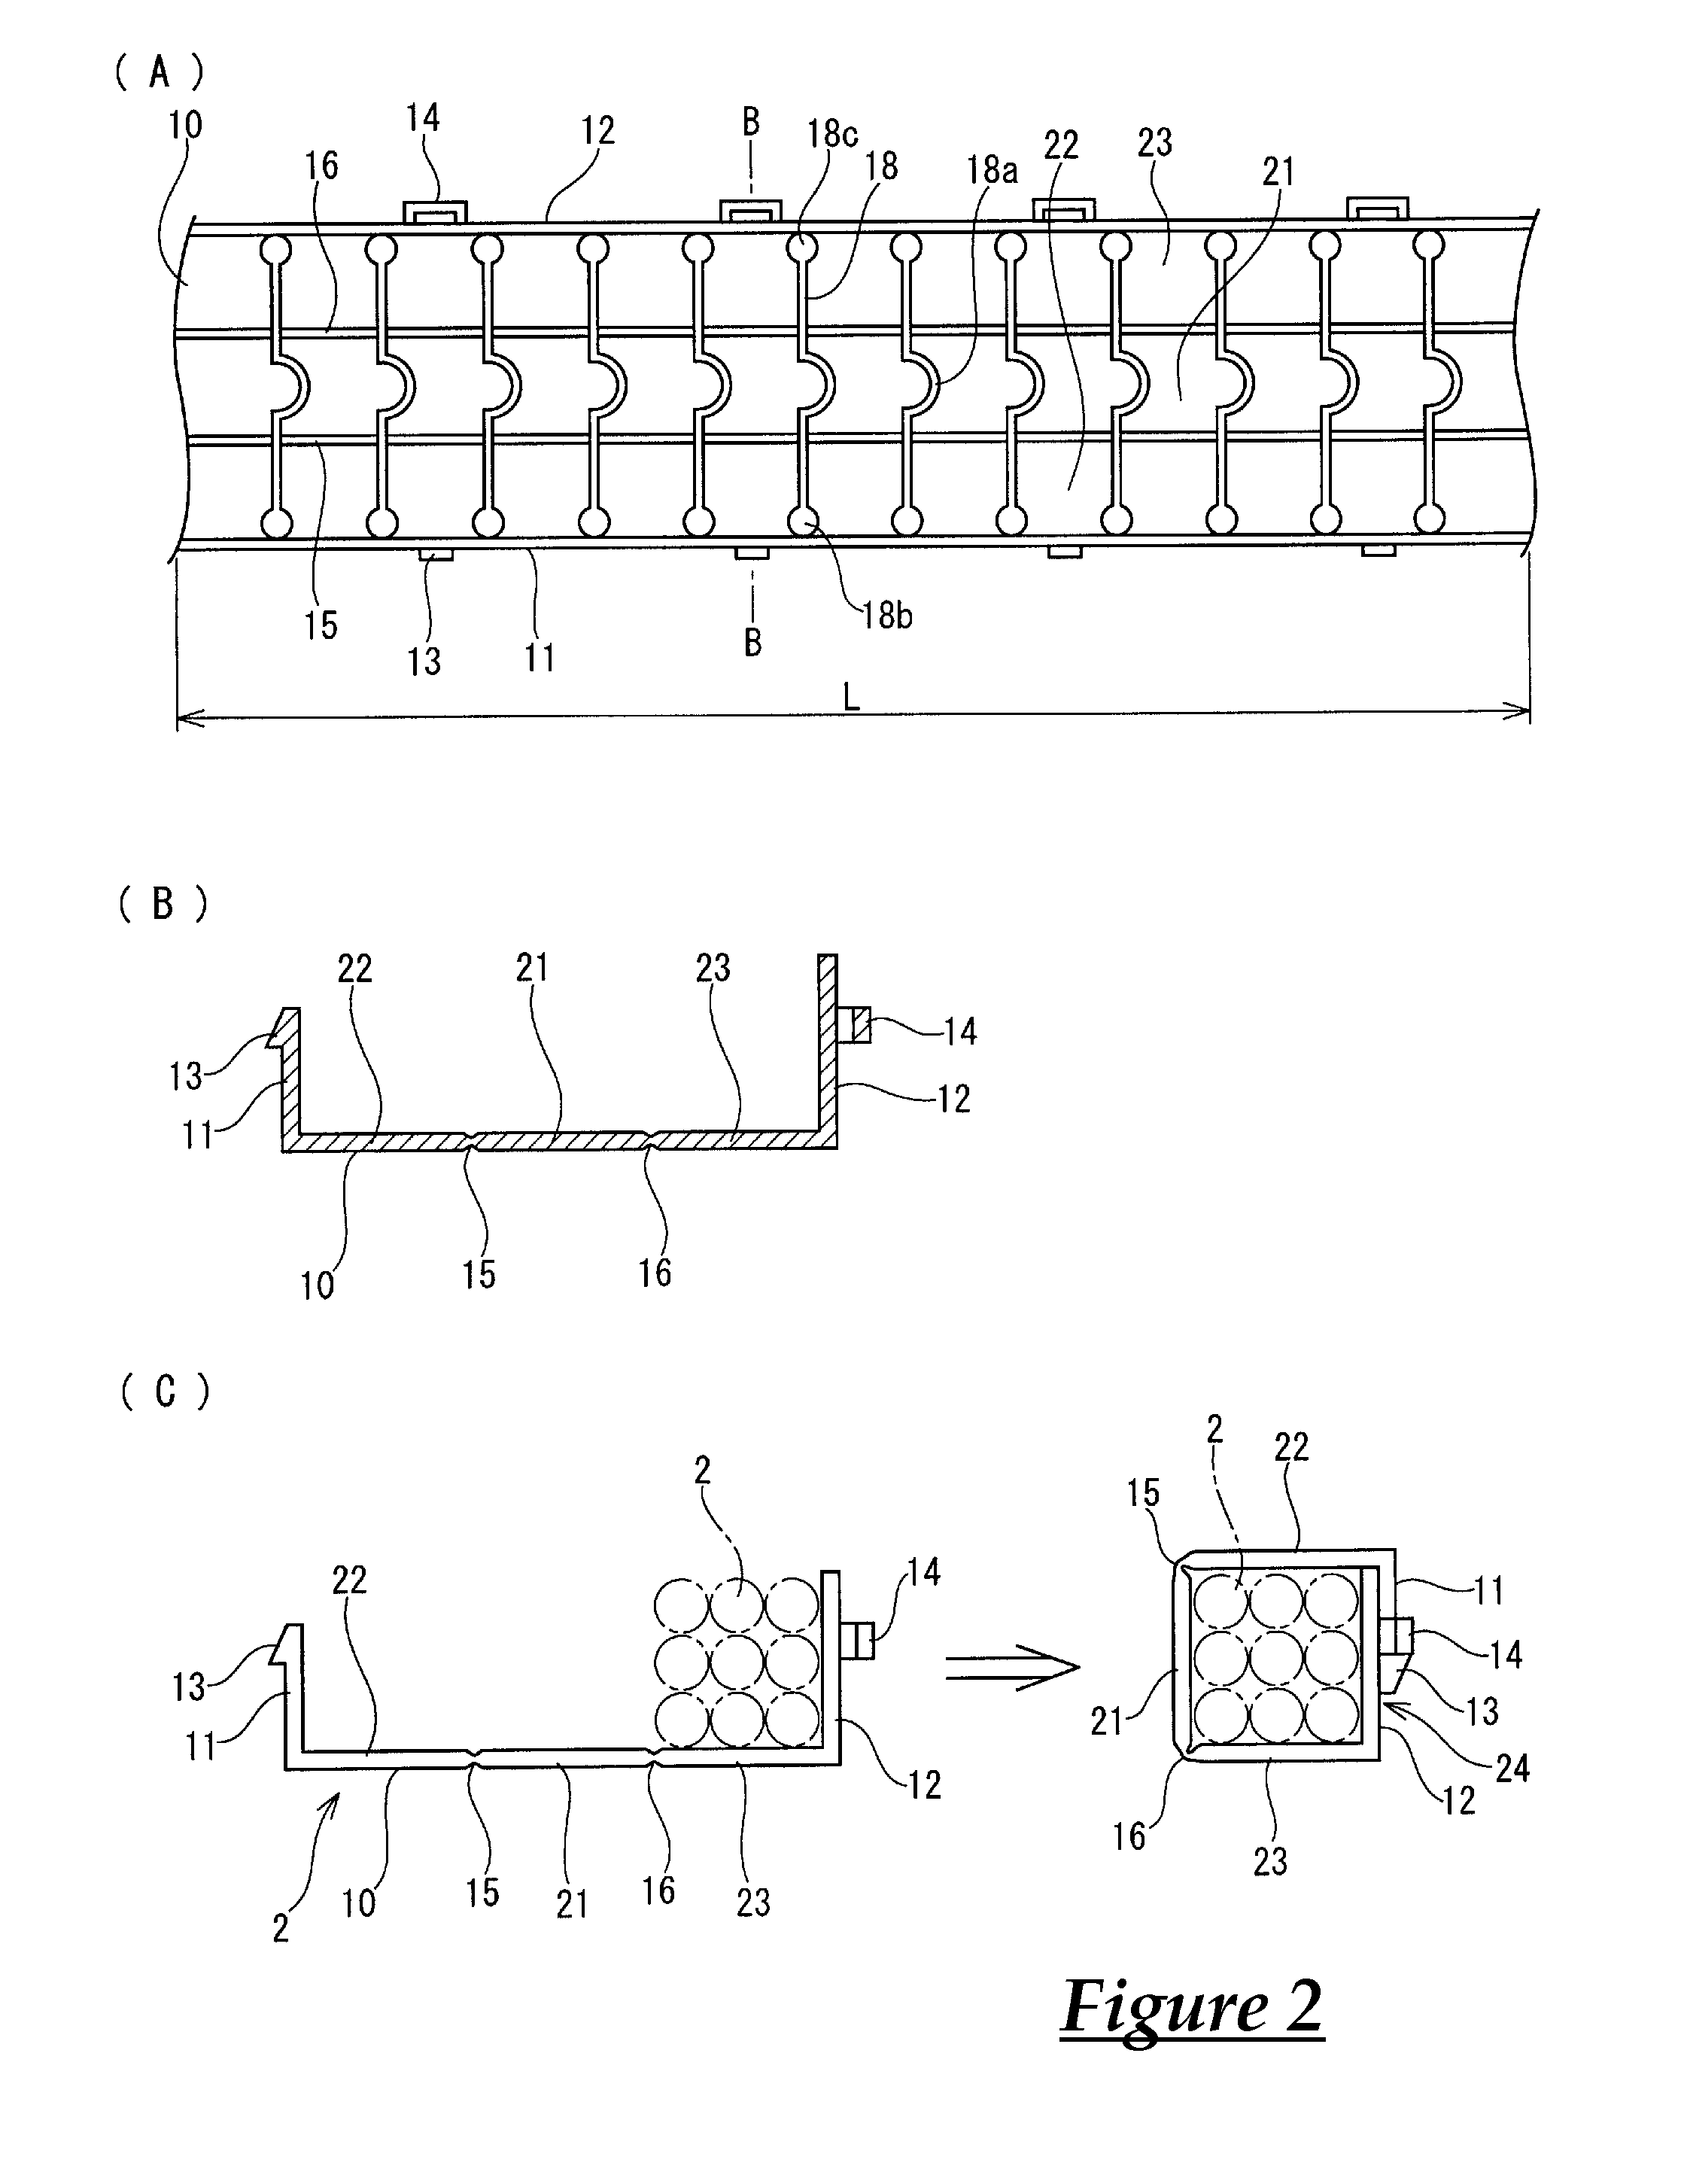 Outer cover material for wire harness, and routing structure for wire harness